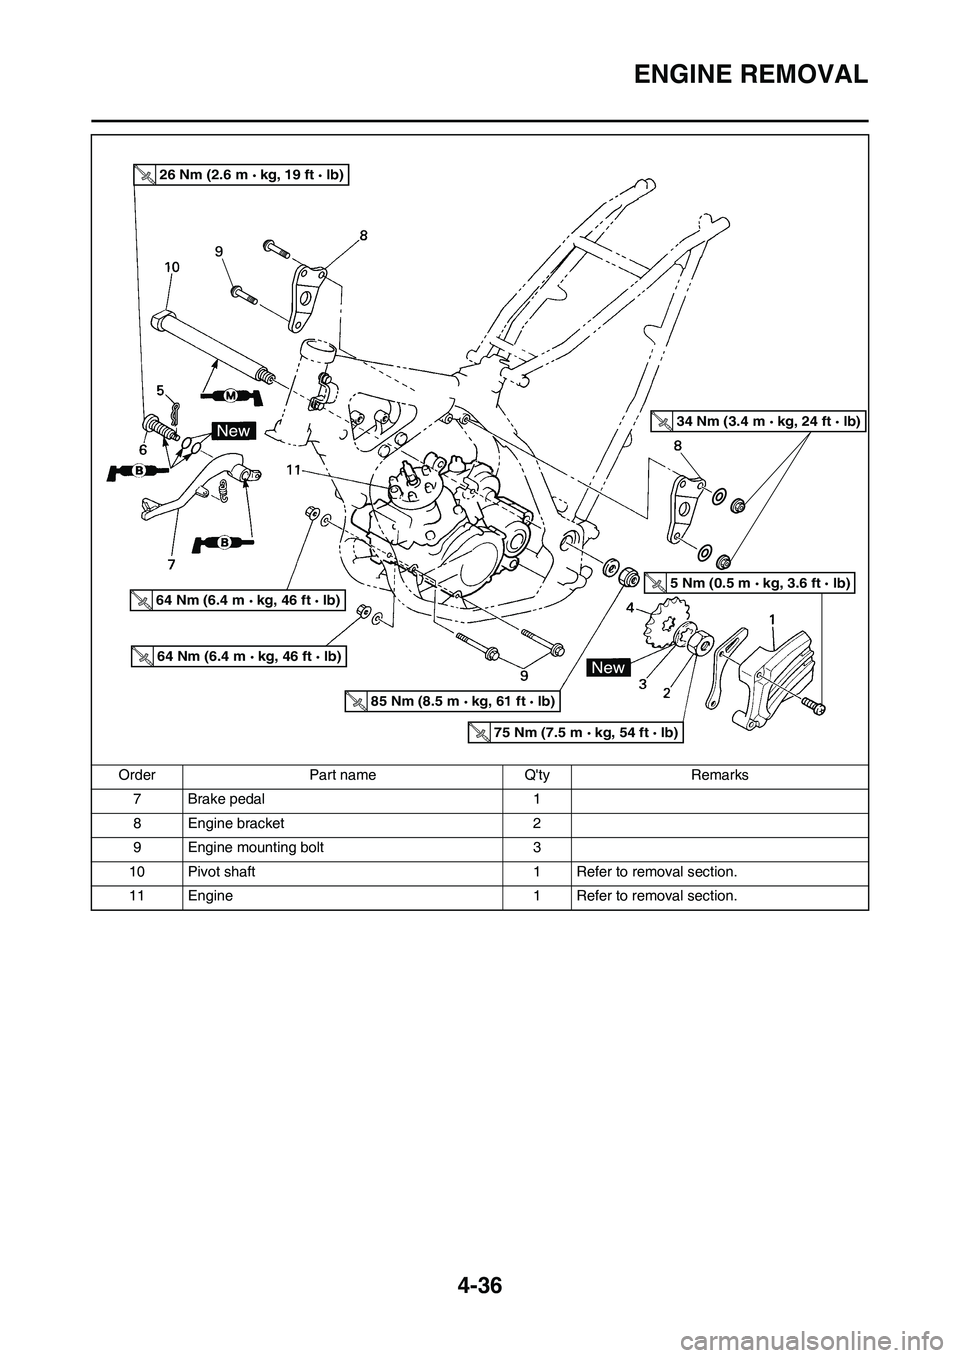 YAMAHA YZ125LC 2010 Owners Guide 4-36
ENGINE REMOVAL
7 Brake pedal 1
8 Engine bracket 2
9 Engine mounting bolt 3
10 Pivot shaft 1 Refer to removal section.
11 Engine 1 Refer to removal section. Order Part name Qty Remarks
26 Nm (2.6